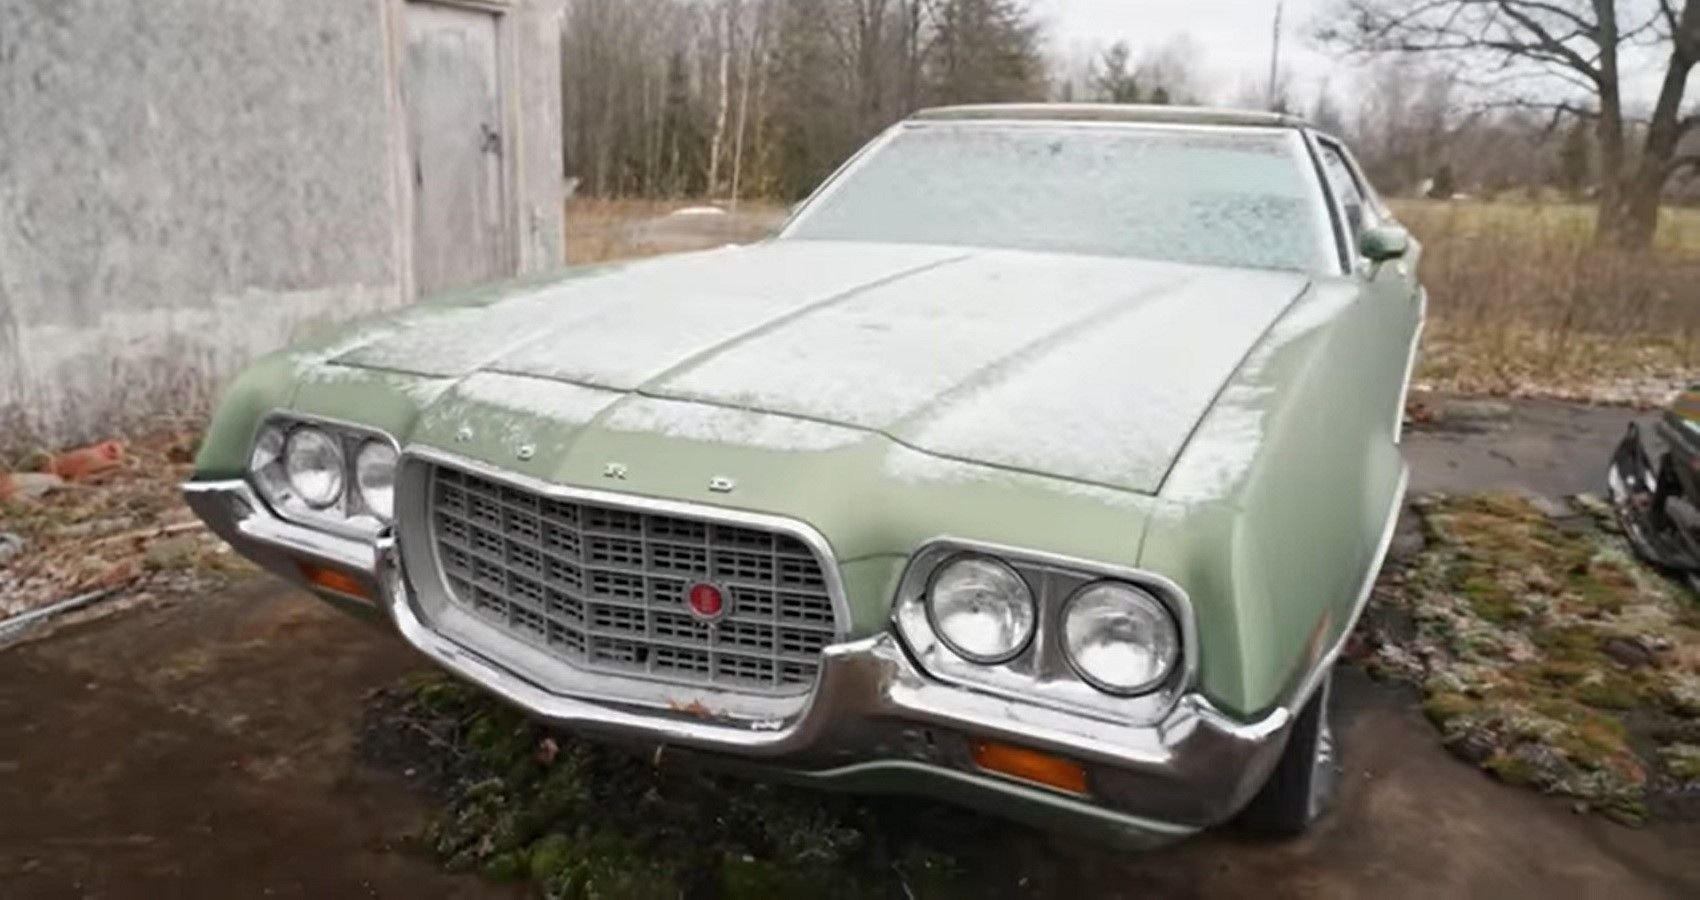 See A 70s Ford Gran Torino With Cobra Jet Engine Roaring Back To Life